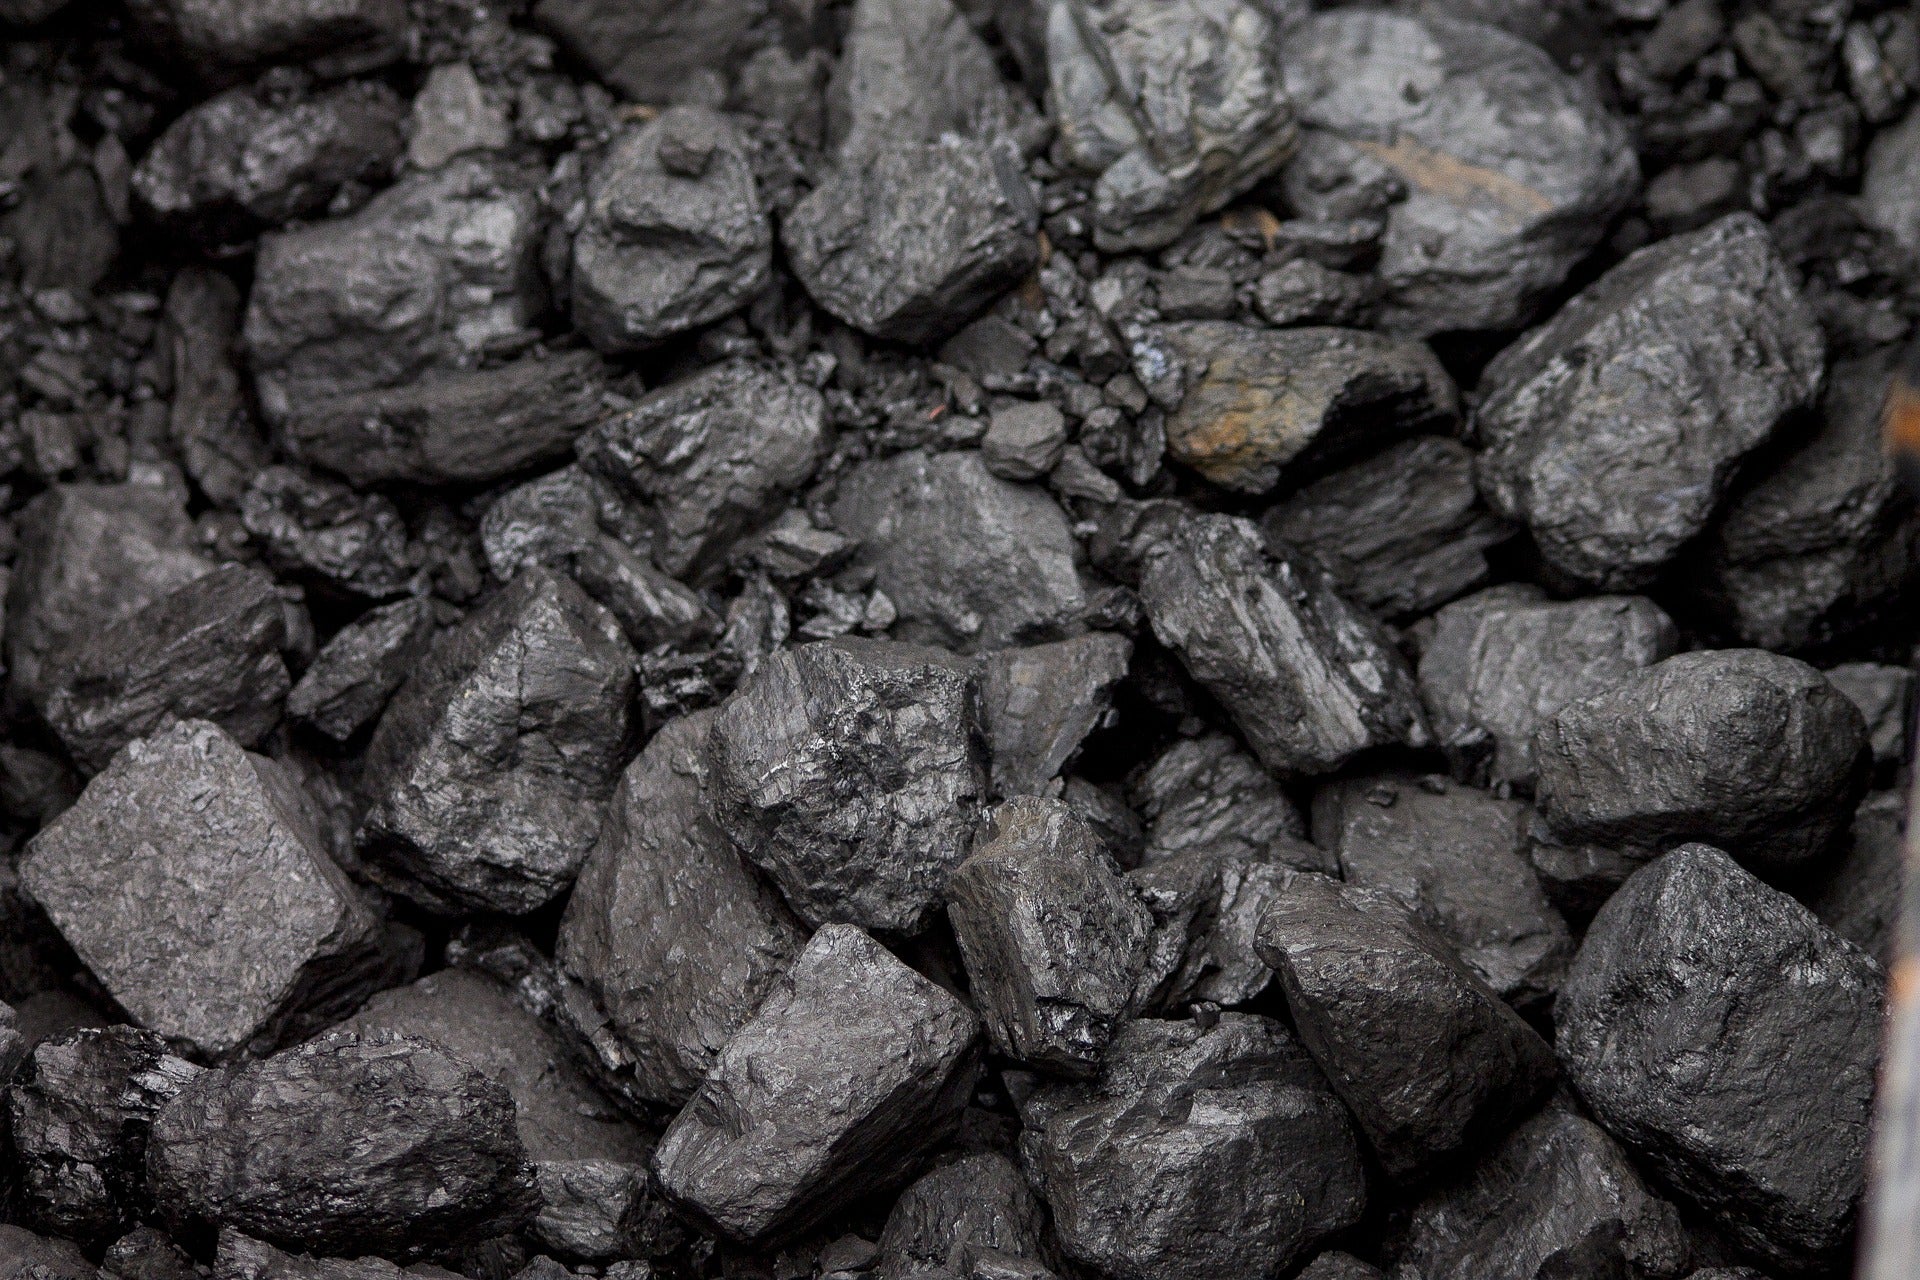 India expects 350 million tonnes of private mine coal output by 2030